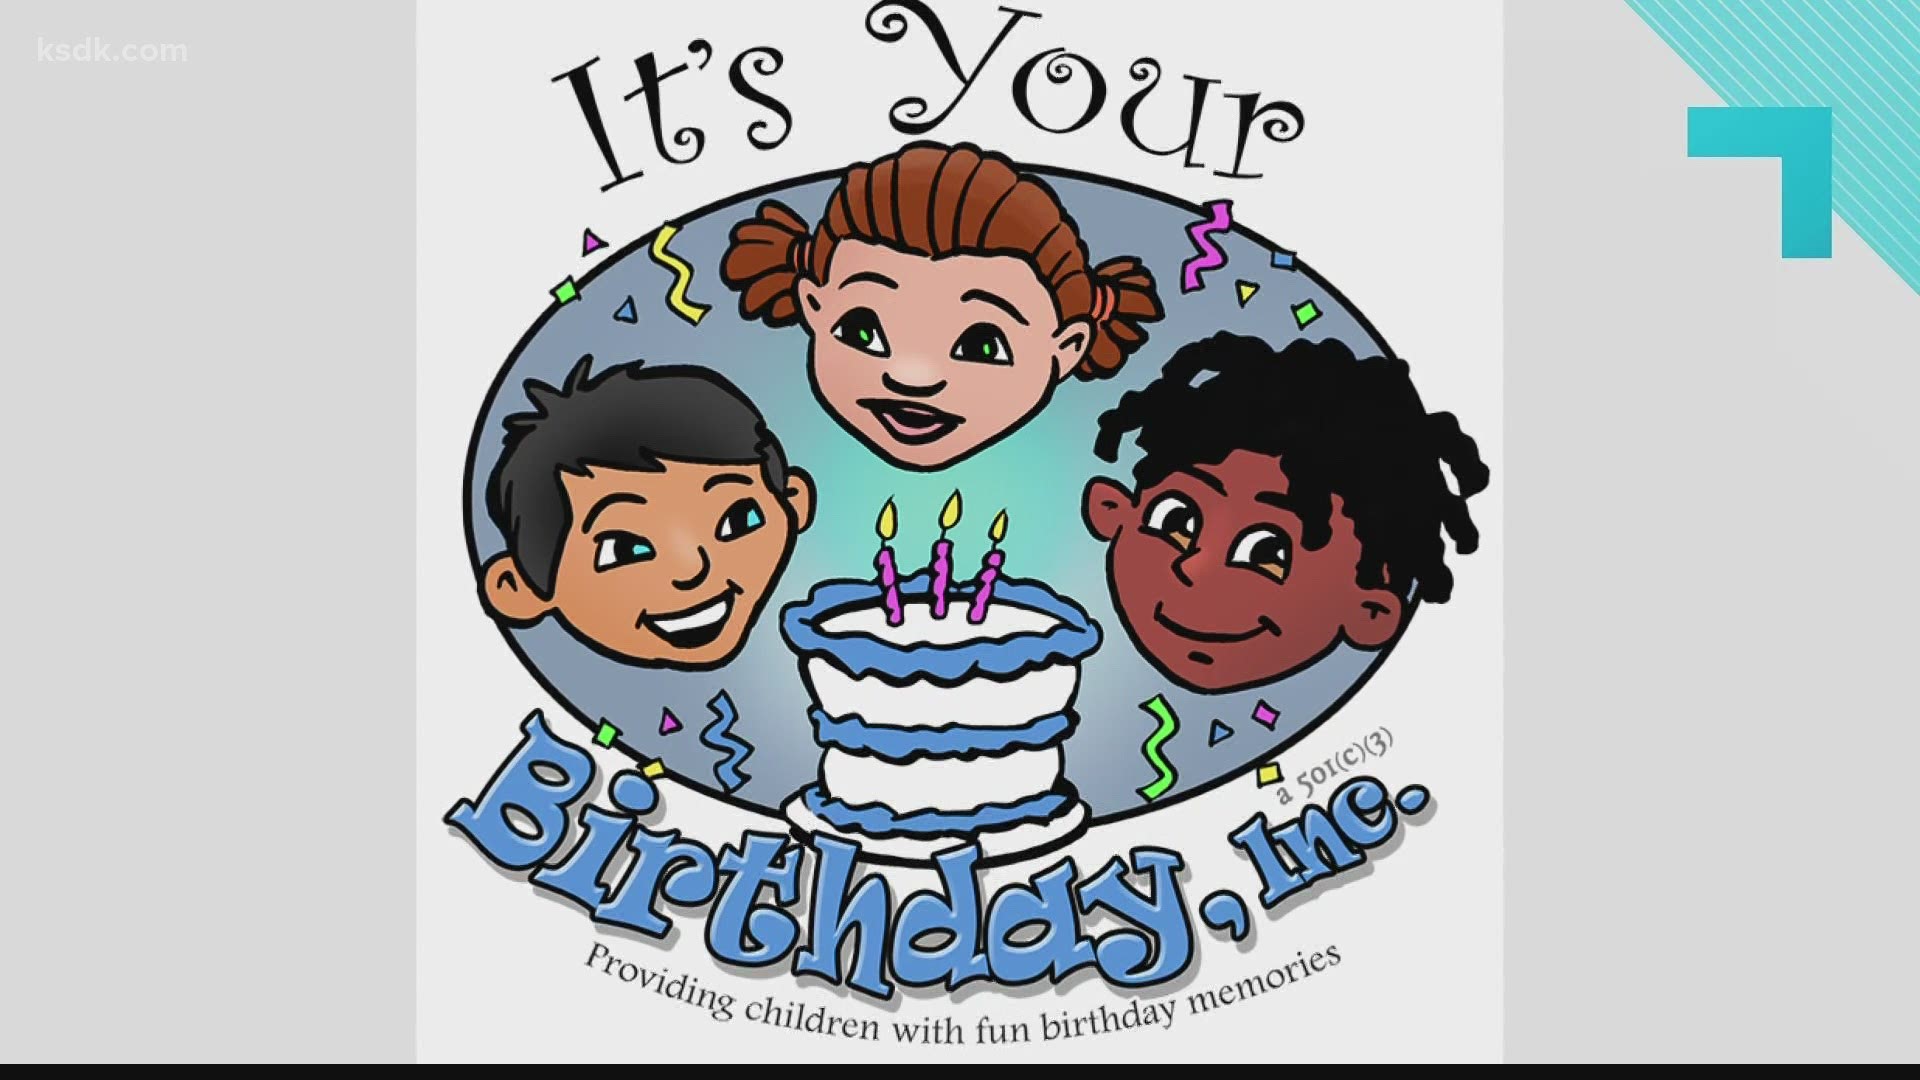 You can help kids in shelters celebrate their birthdays with It’s Your Birthday, Inc.